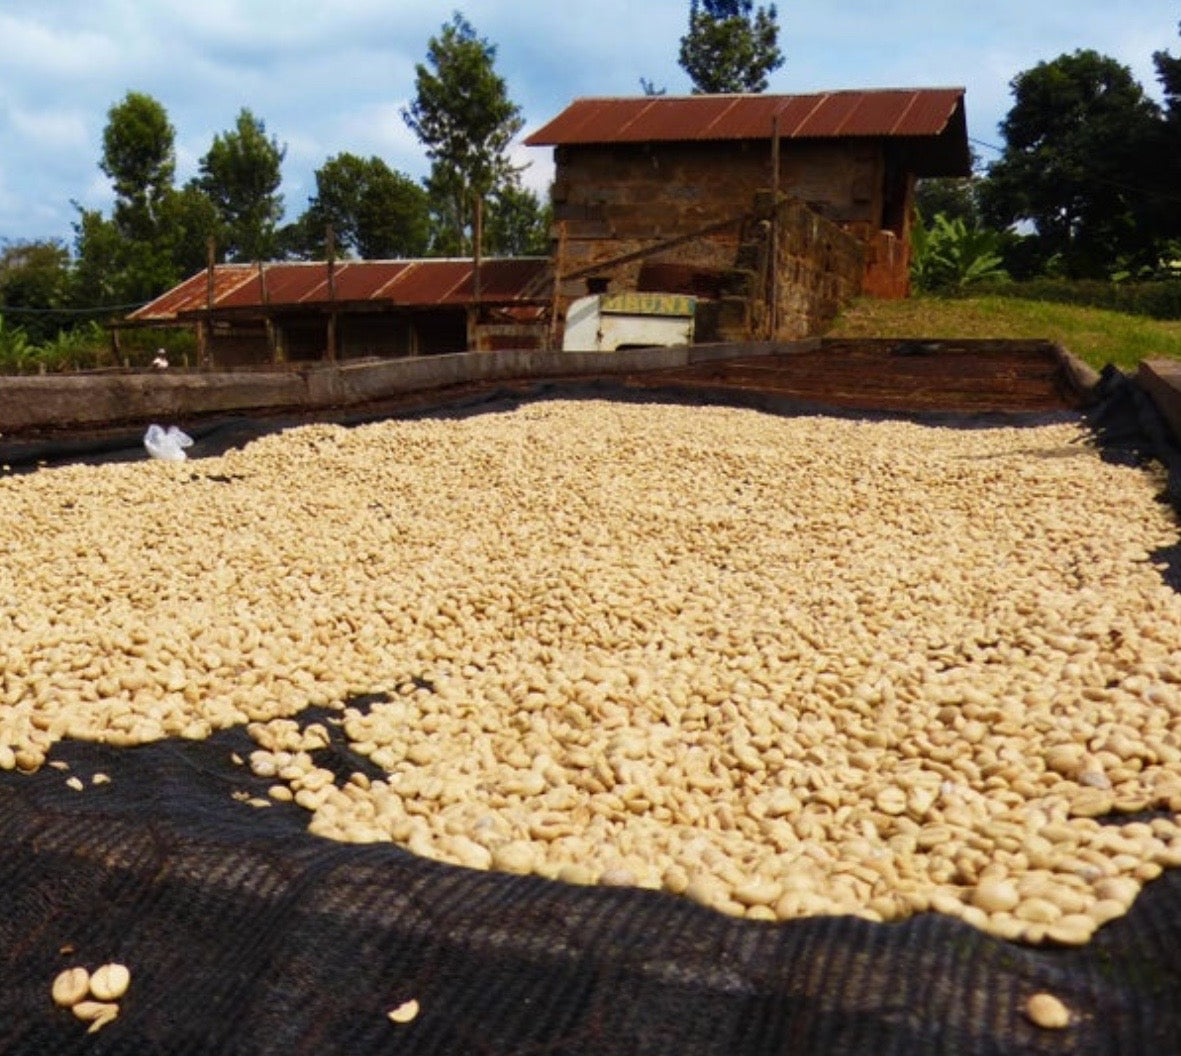 Washed coffee beans drying on raised beds